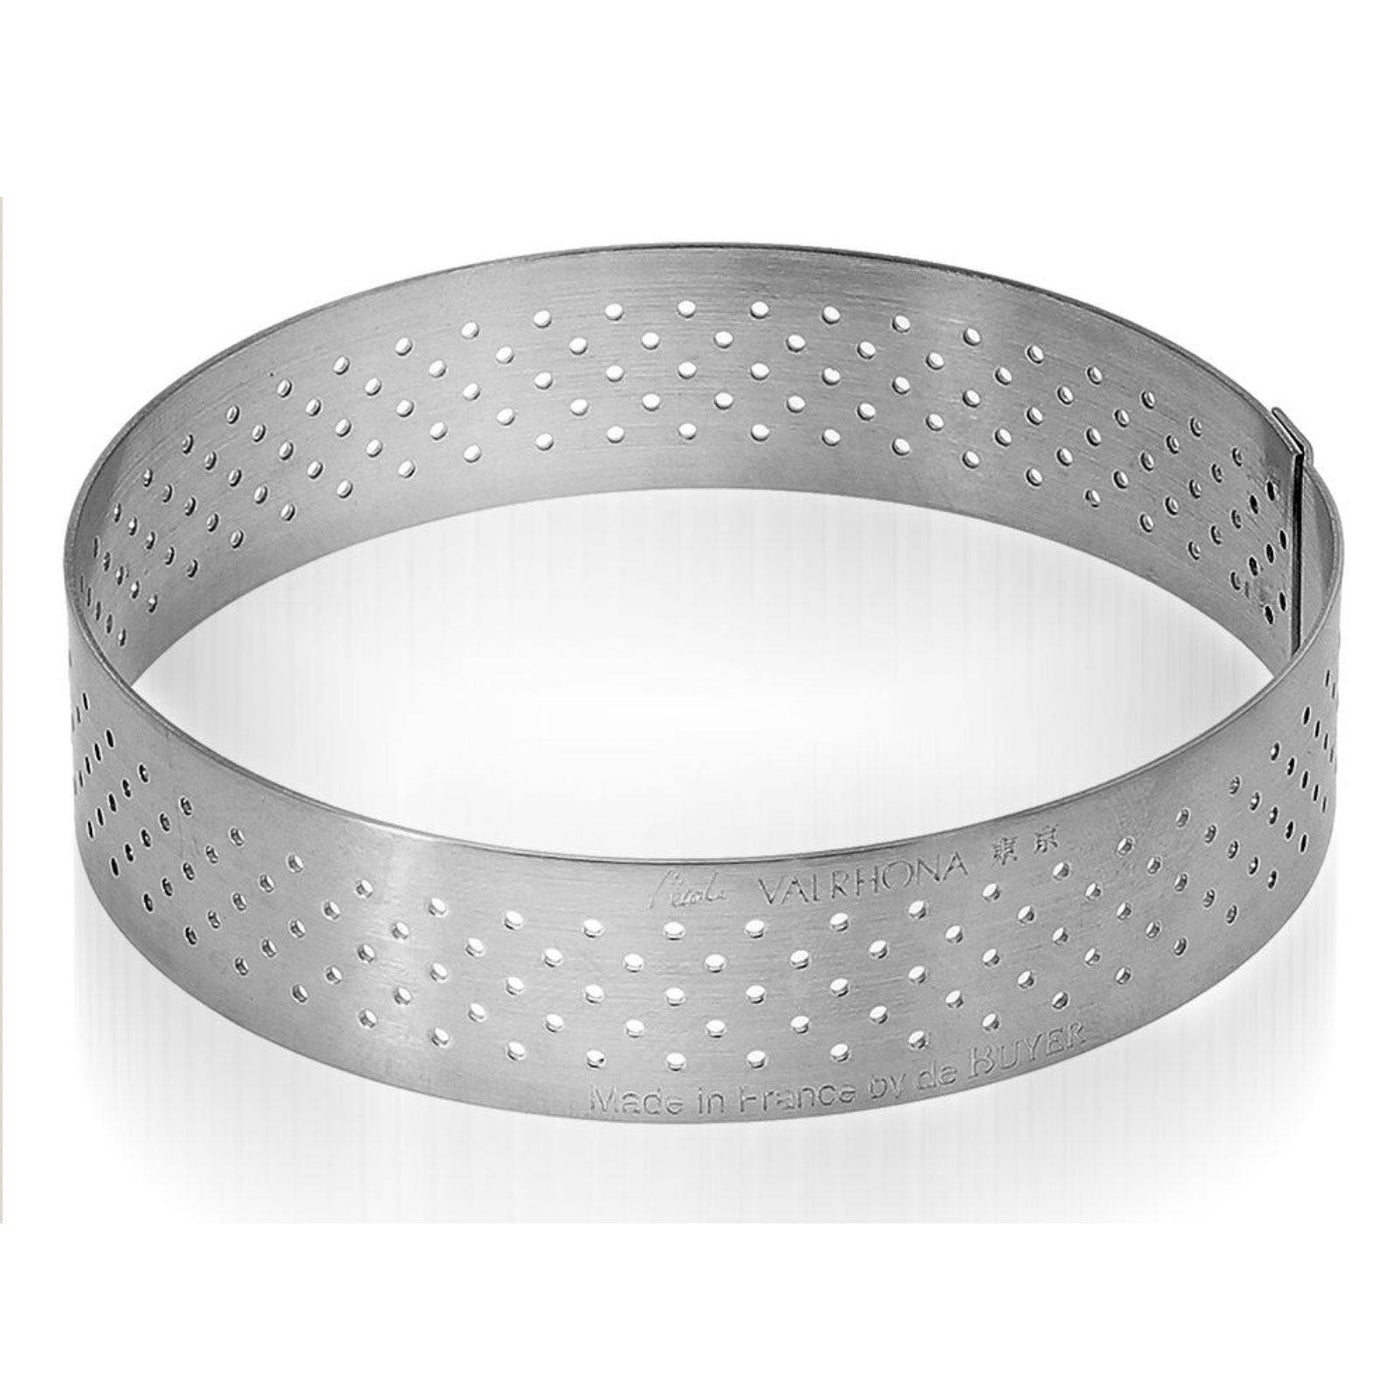 de Buyer Valrhona Stainless Steel Perforated Tart Ring, 2.5-in - Kitchen Universe